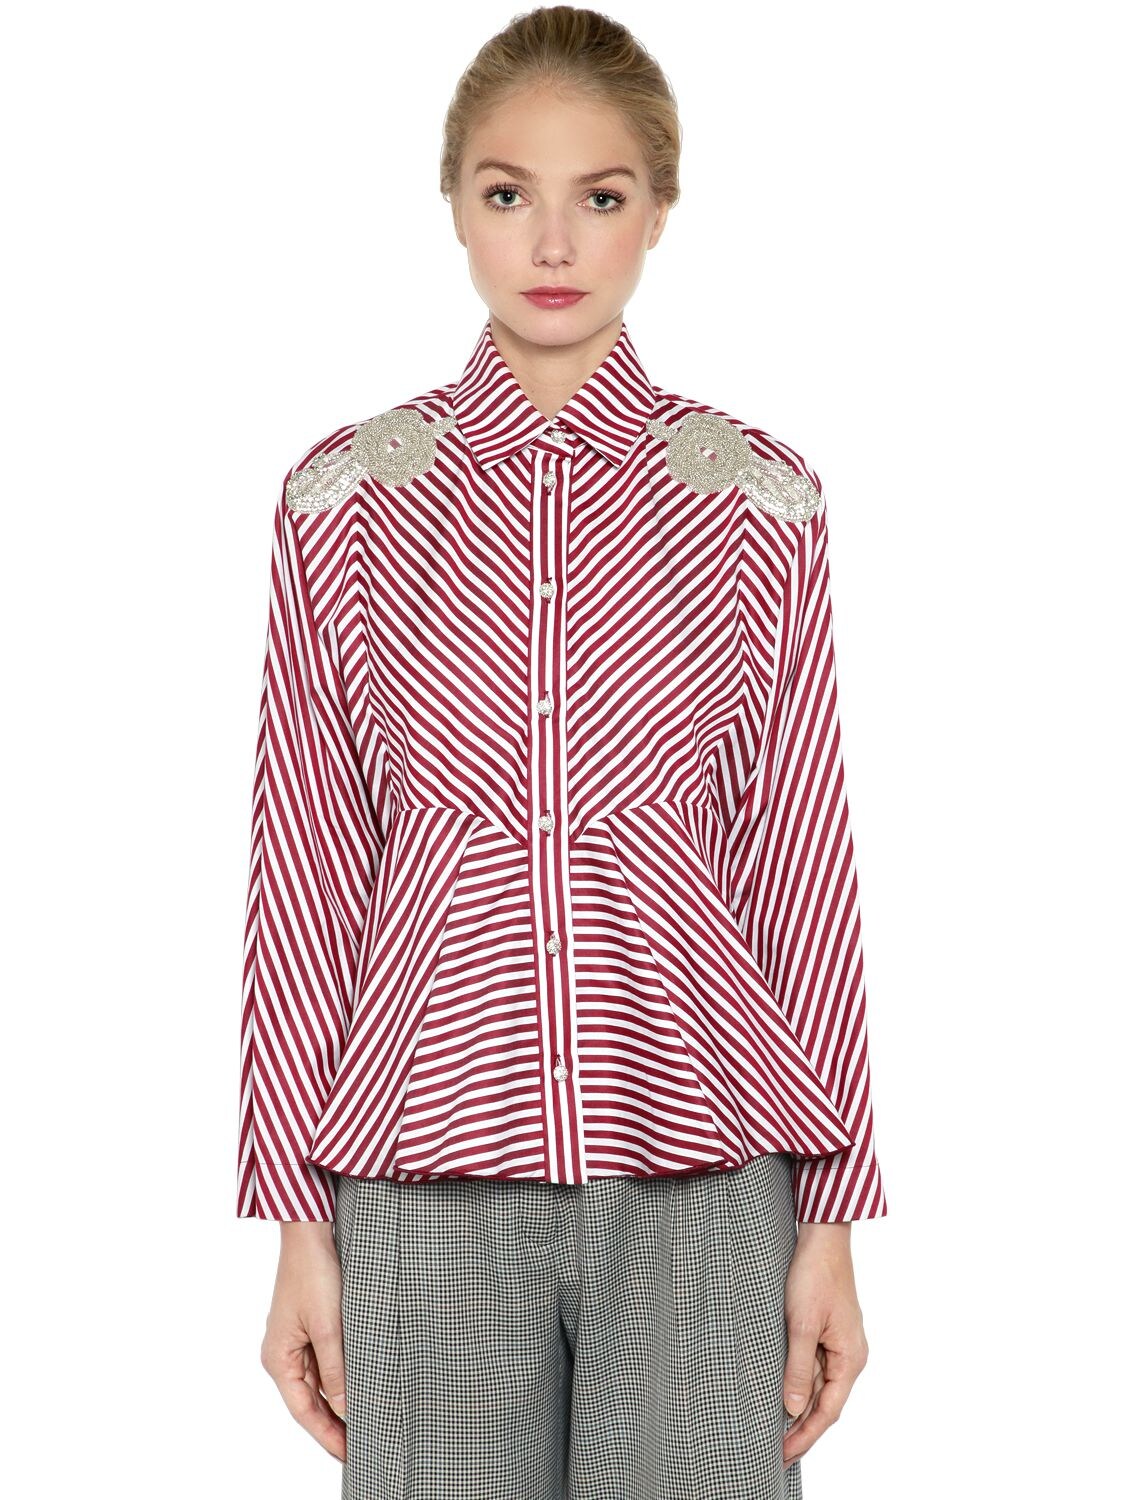 Antonio Marras Embellished Striped Cotton Shirt In White/red